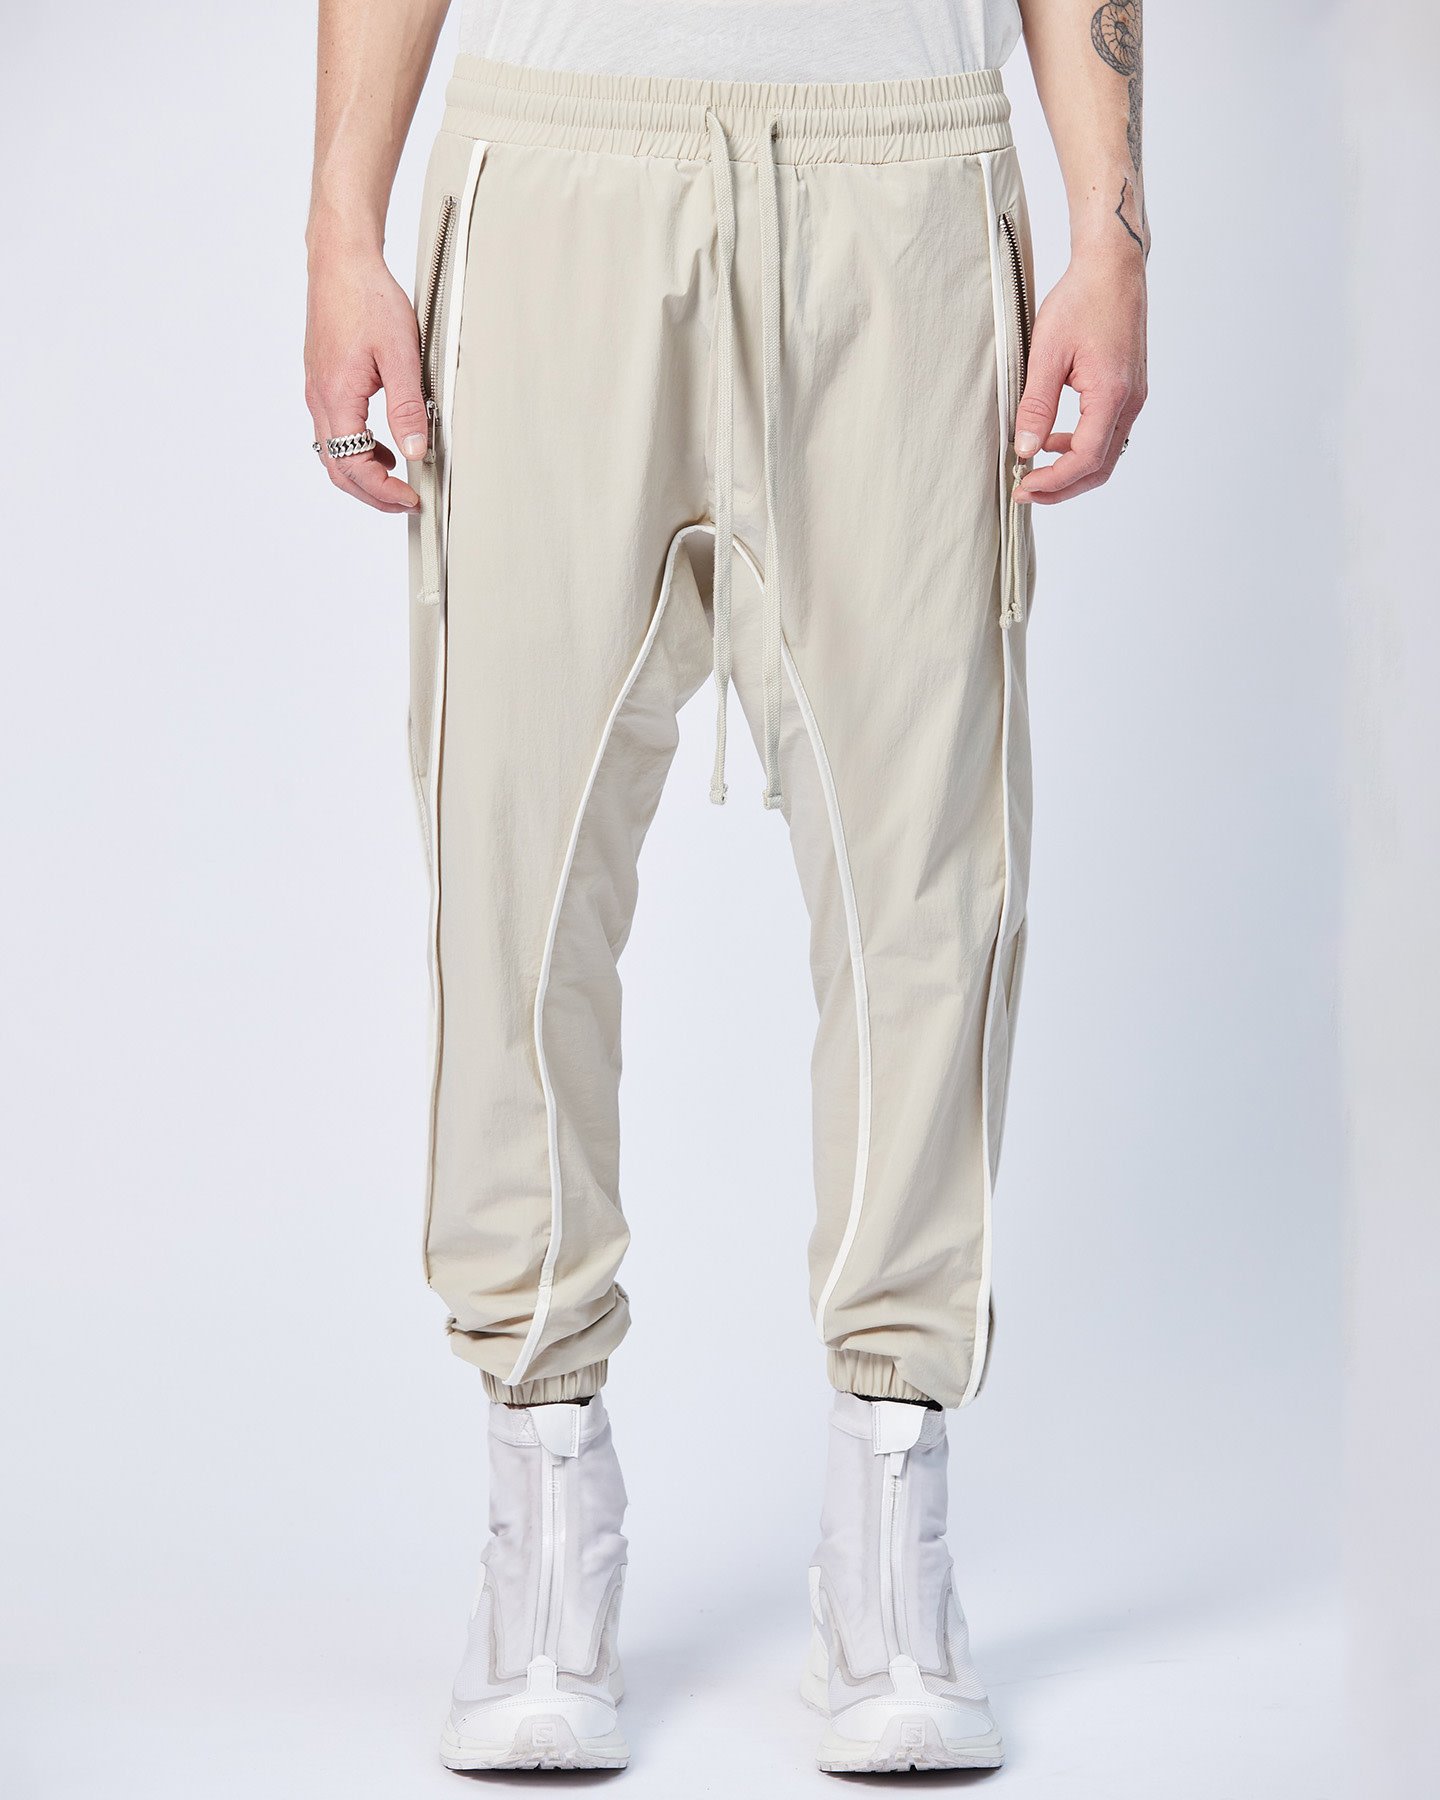 HYPER STRETCH NYLON JOGGER WITH CONTRAST PIPING - SAND